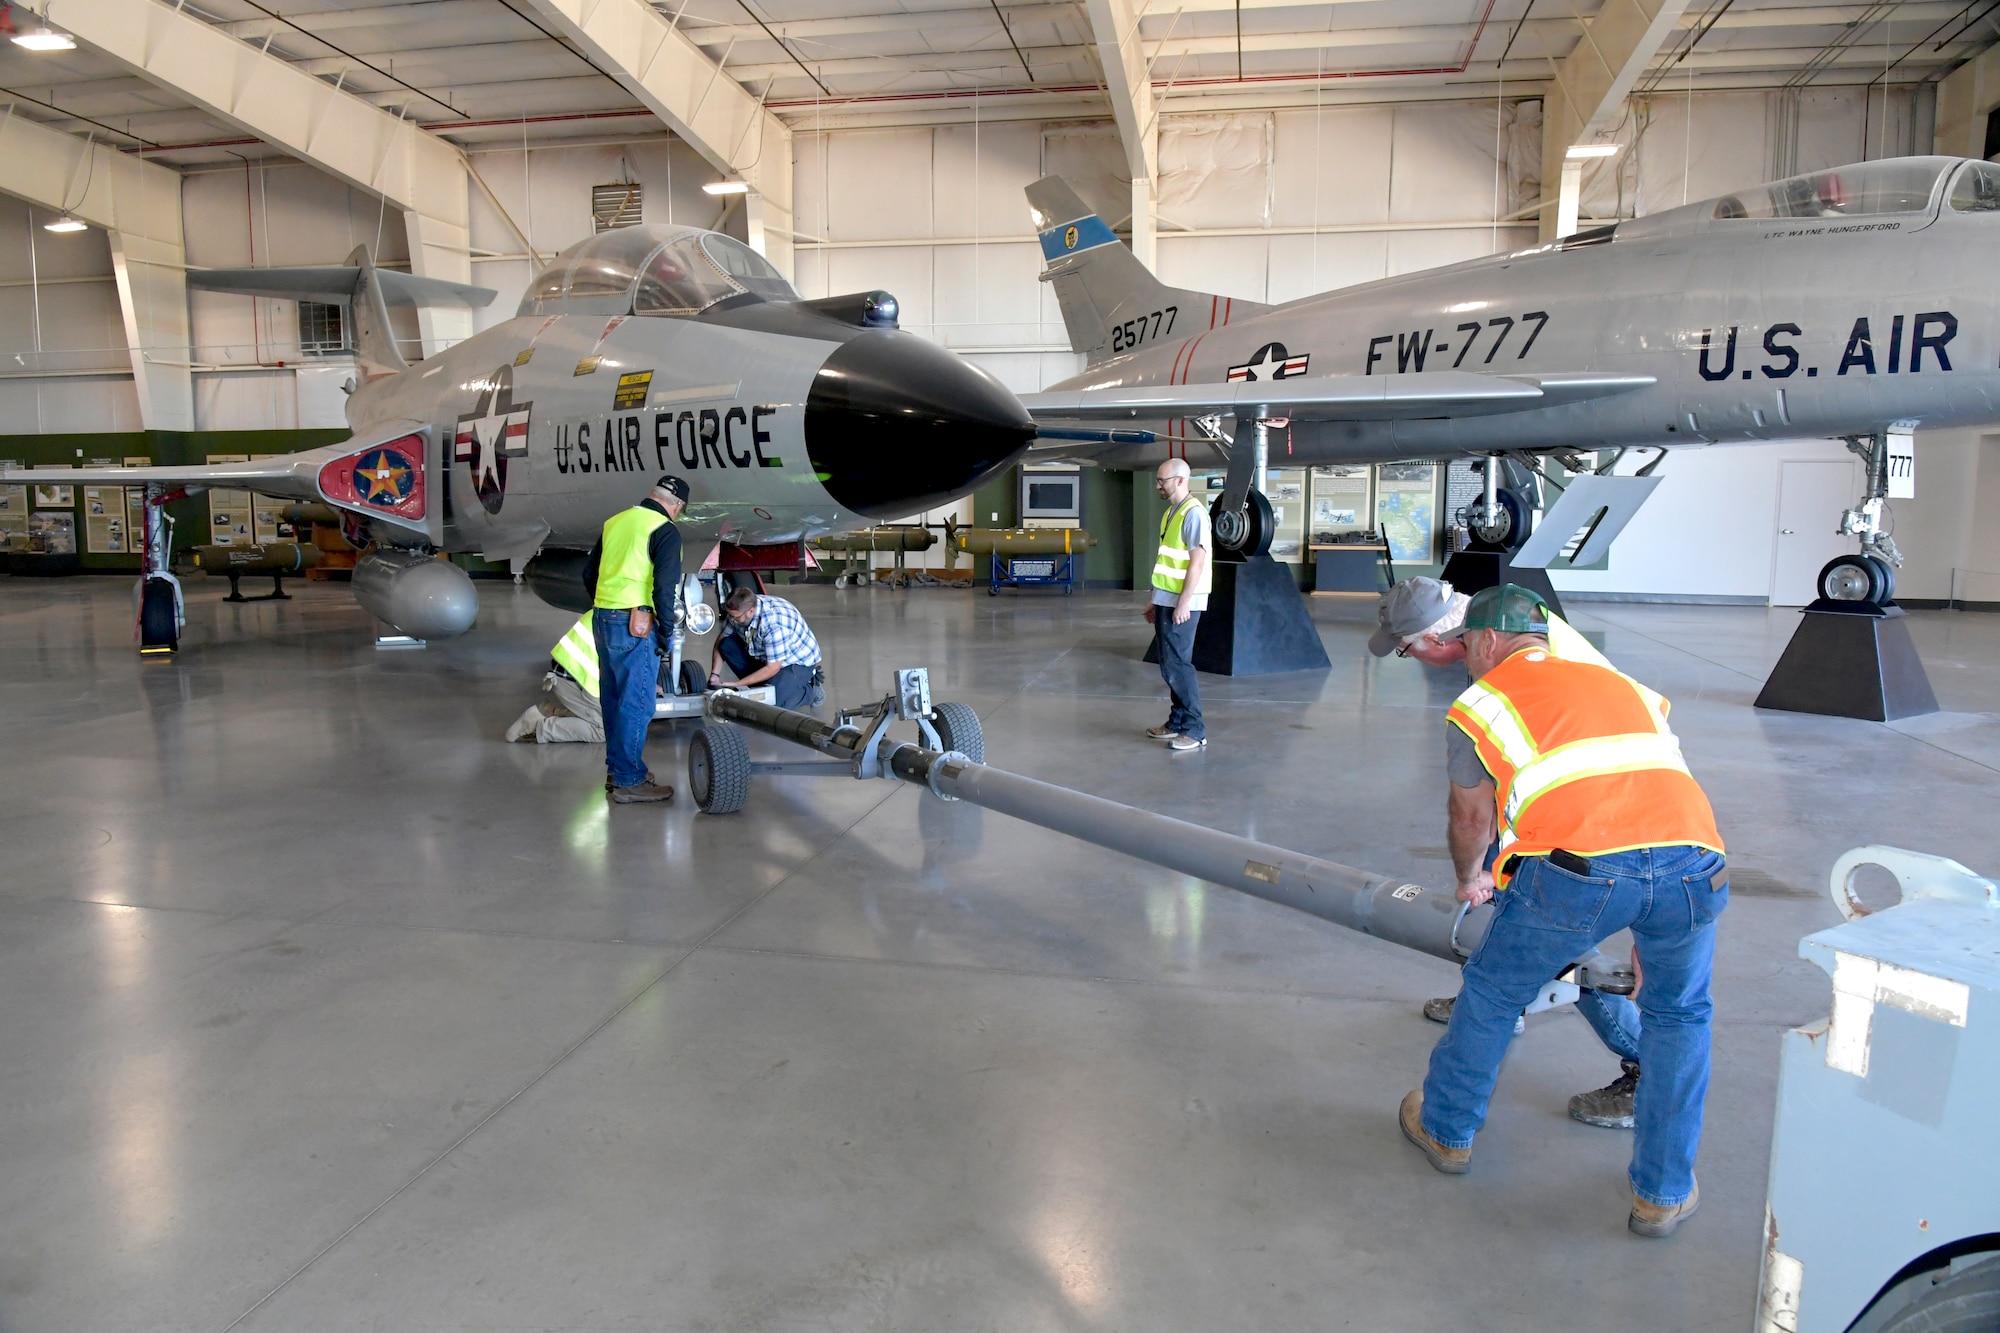 Crews prepare to relocate an F-101 Voodoo static display at the Hill Aerospace Museum Oct. 23, 2023, at Hill Air Force Base, Utah. Last month, a significant portion of the museum’s more modern generation aircraft were moved into the new L.S. Skaggs Gallery by museum staff and volunteers from organizations outside the museum. (U.S. Air Force photo by Todd Cromar)